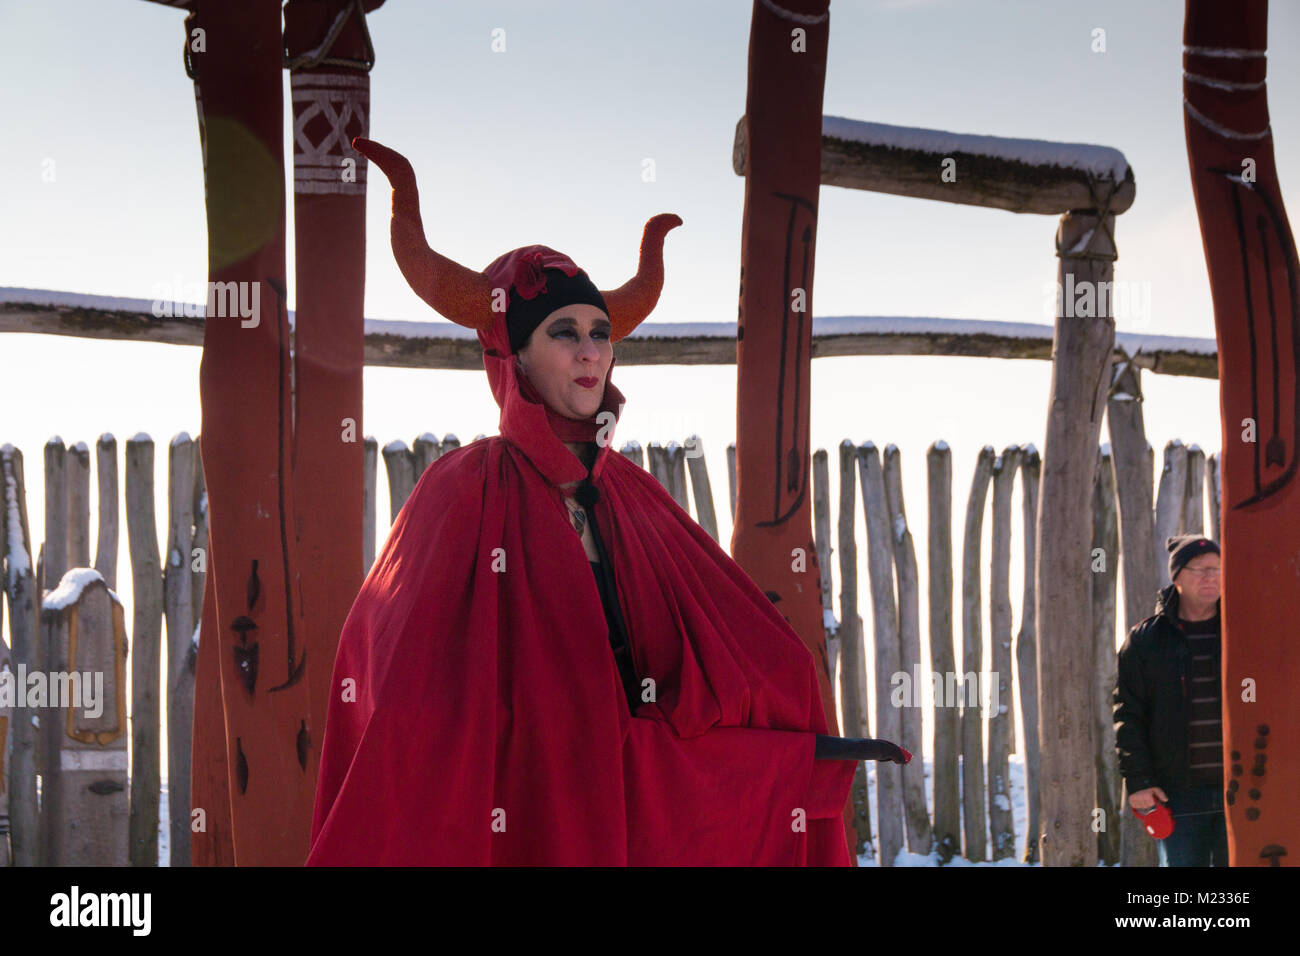 Poemmelte, Germany - February 4,2018: A fire-eater in a devil's costume drives away the winter in the Ringhe sanctuary of Poemmelte. The prehistoric r Stock Photo